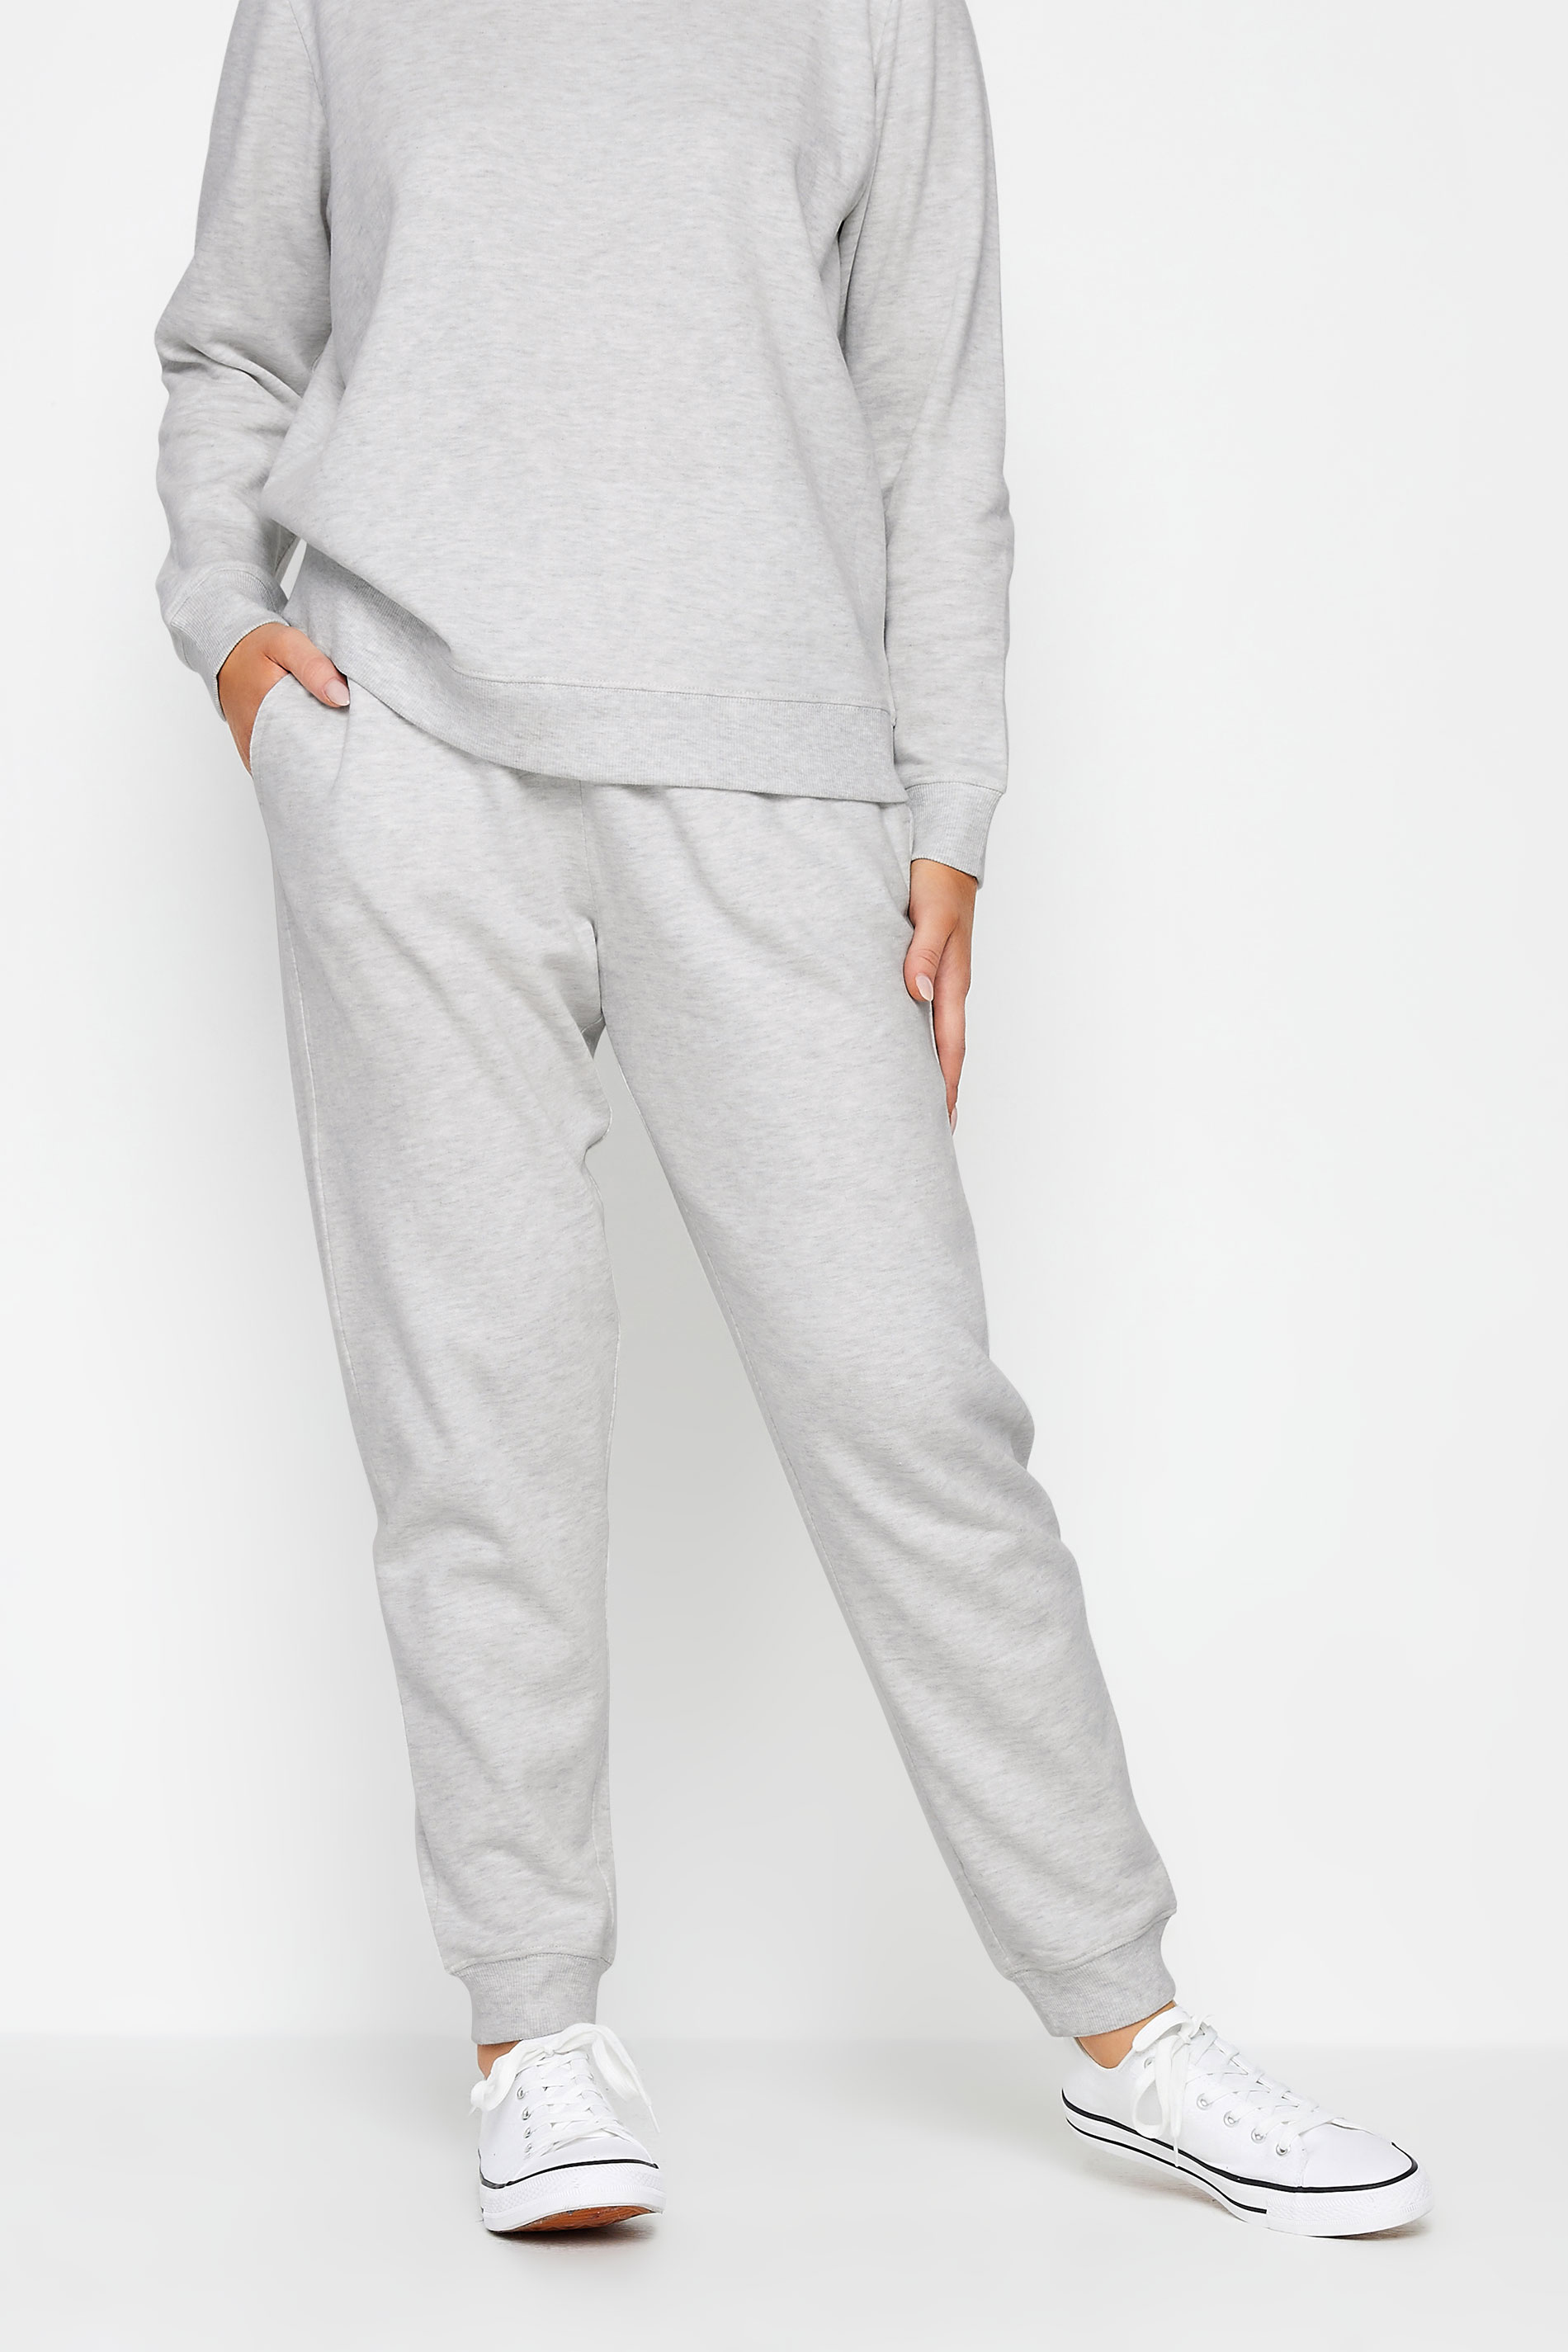 M&Co Grey Marl Essential Joggers | M&Co 1